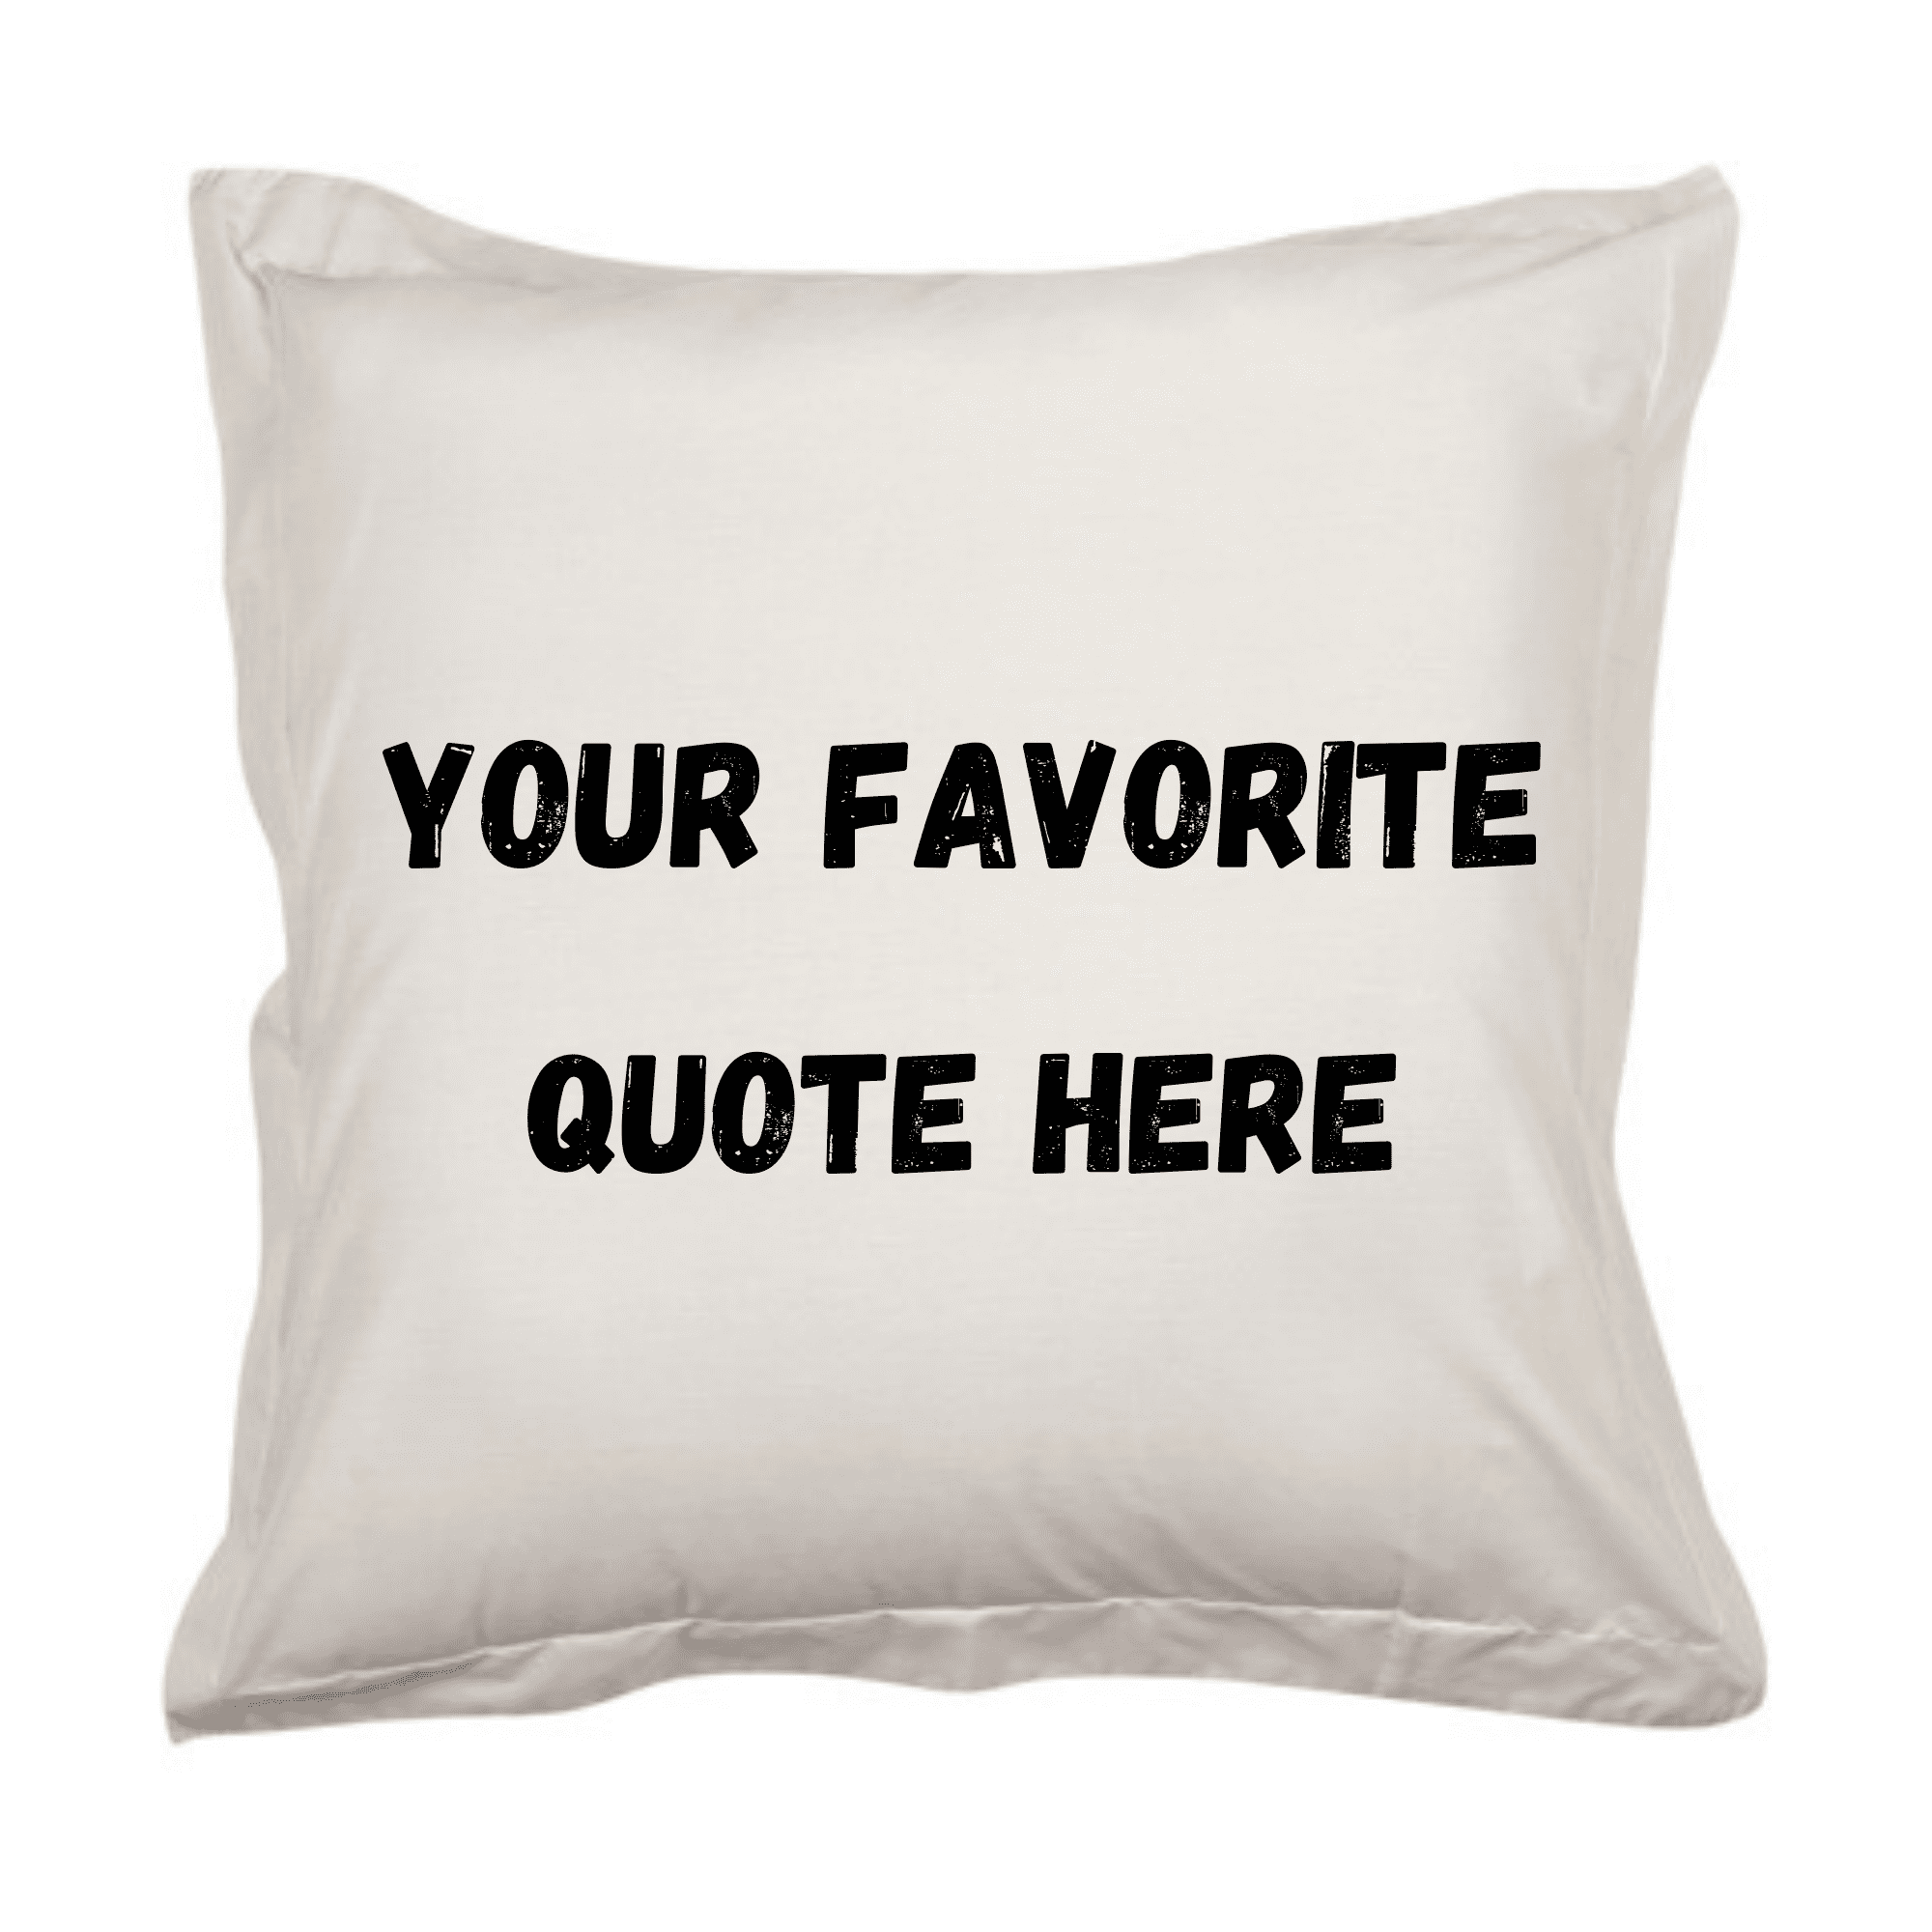 Your-Favorite-Quote-Here